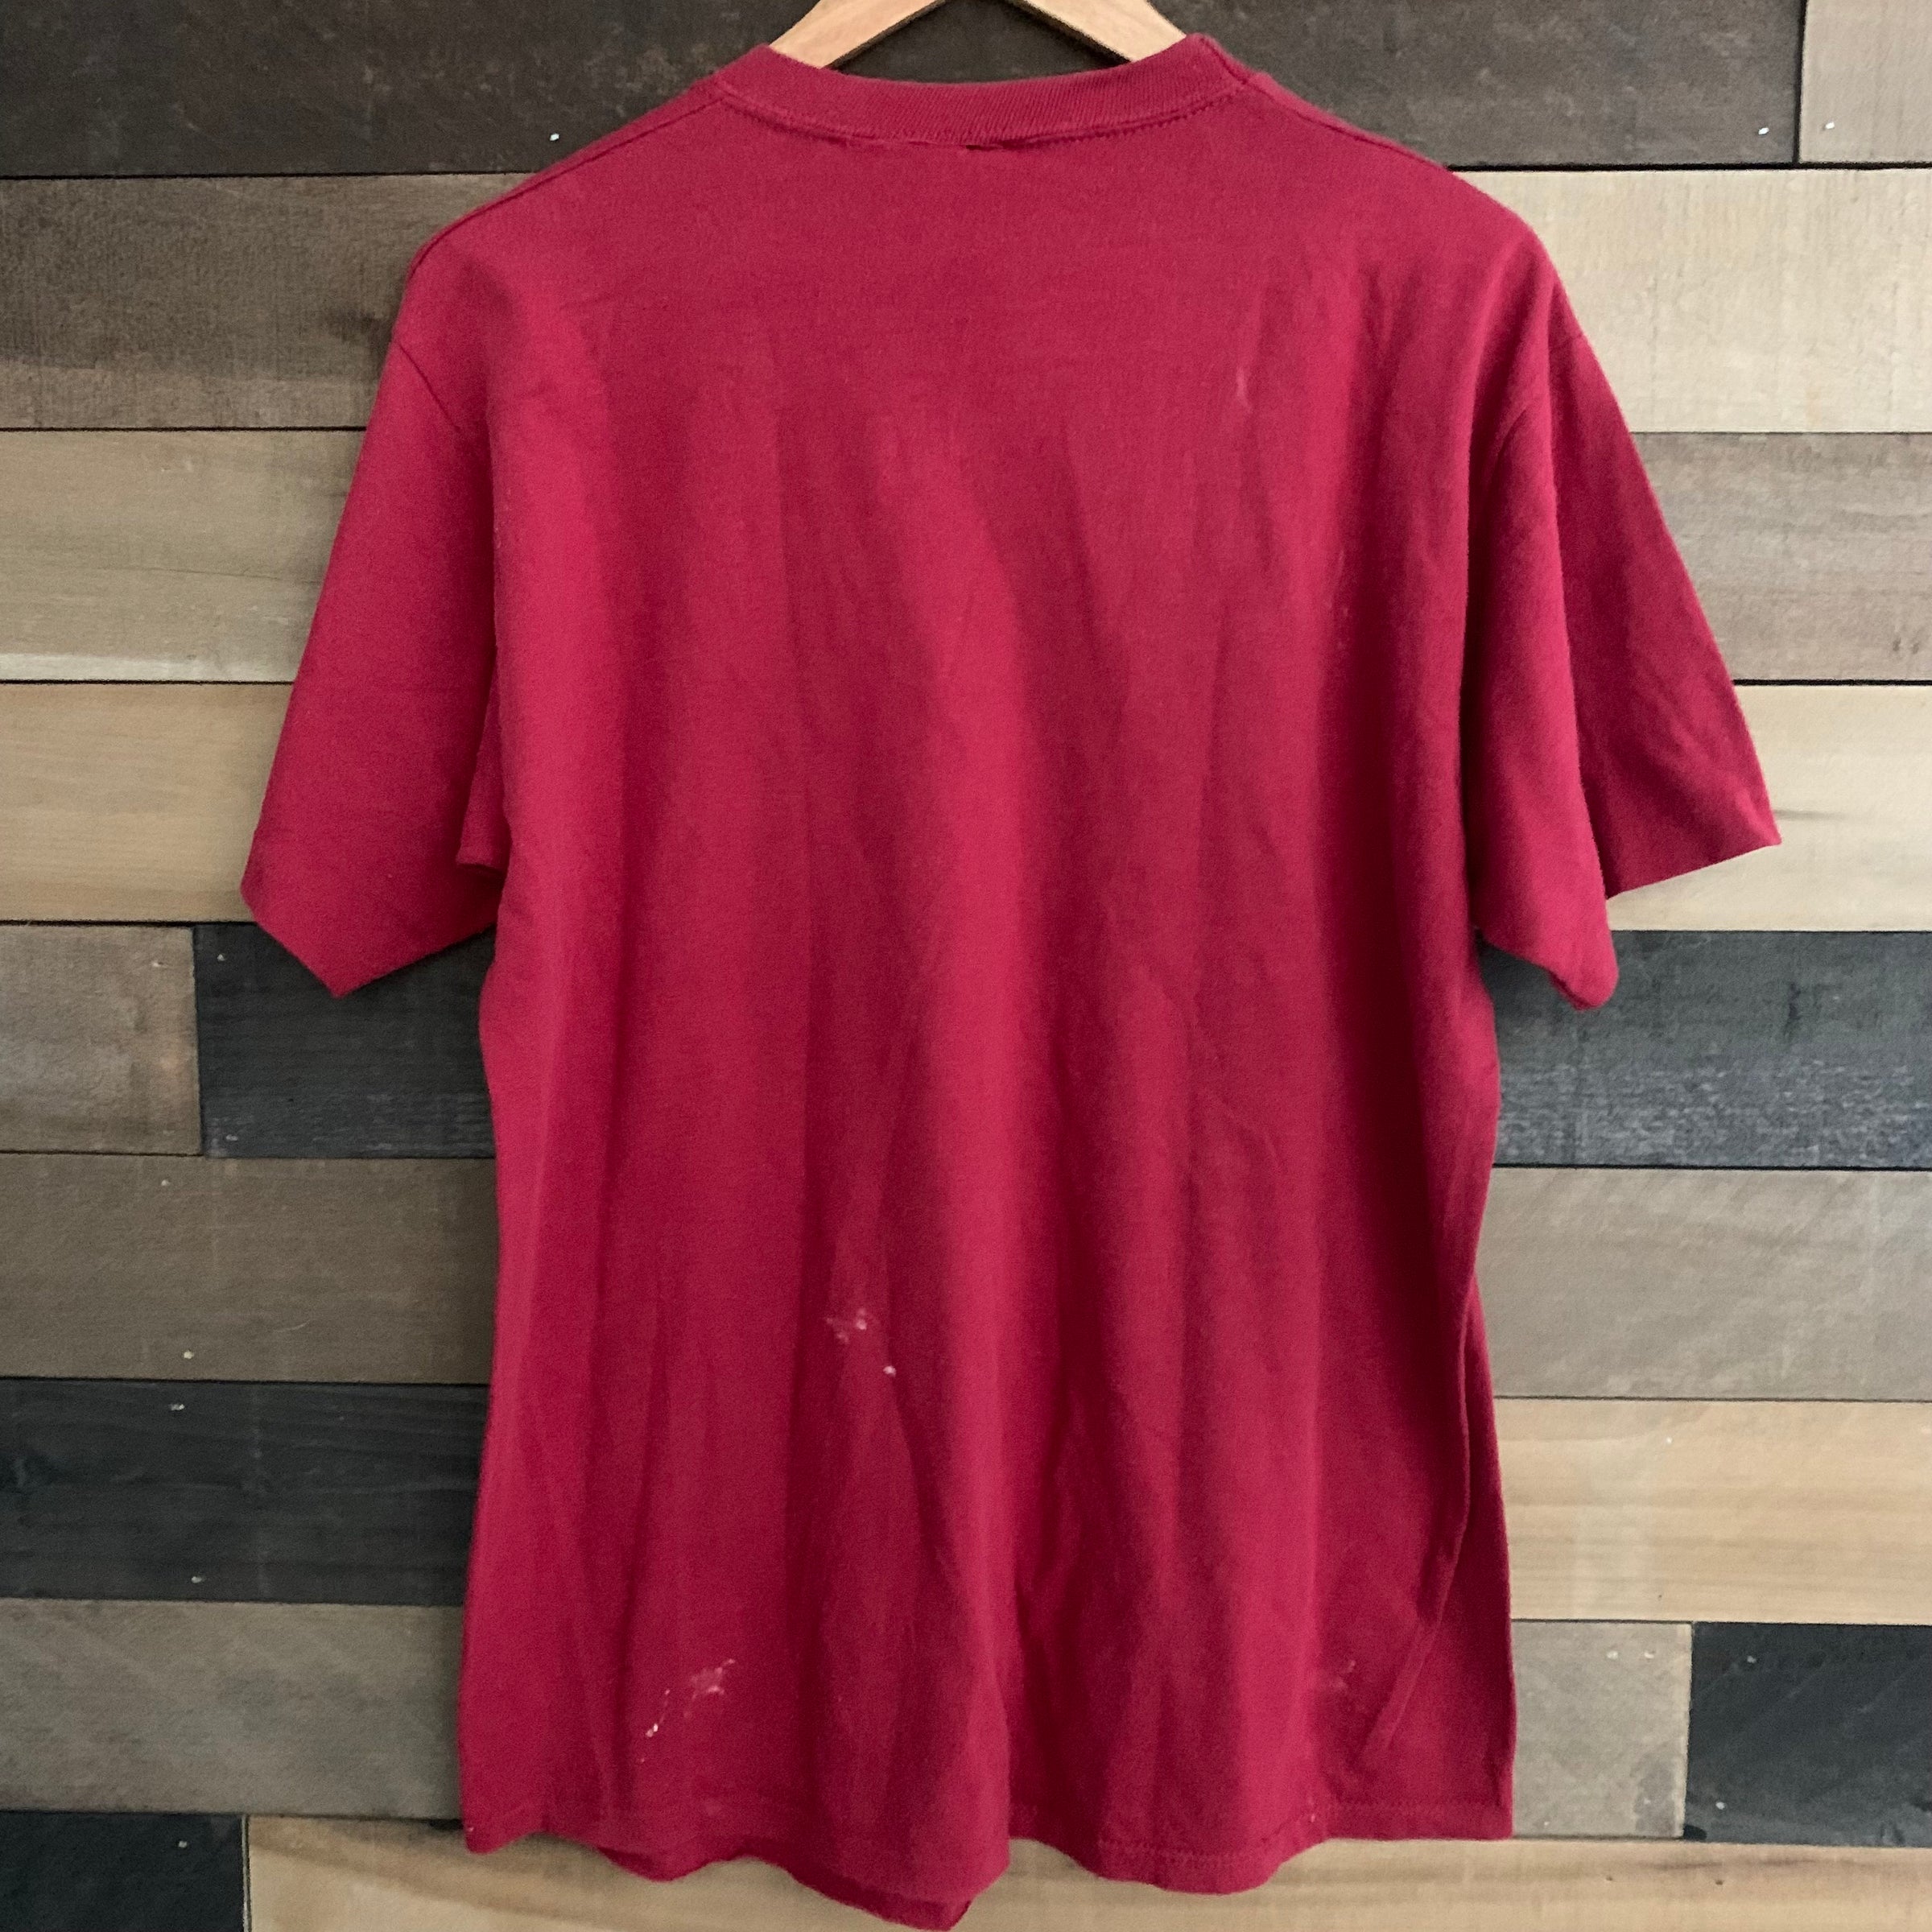 1980's/1990's Paint Stained Burgundy "Western" T-Shirt